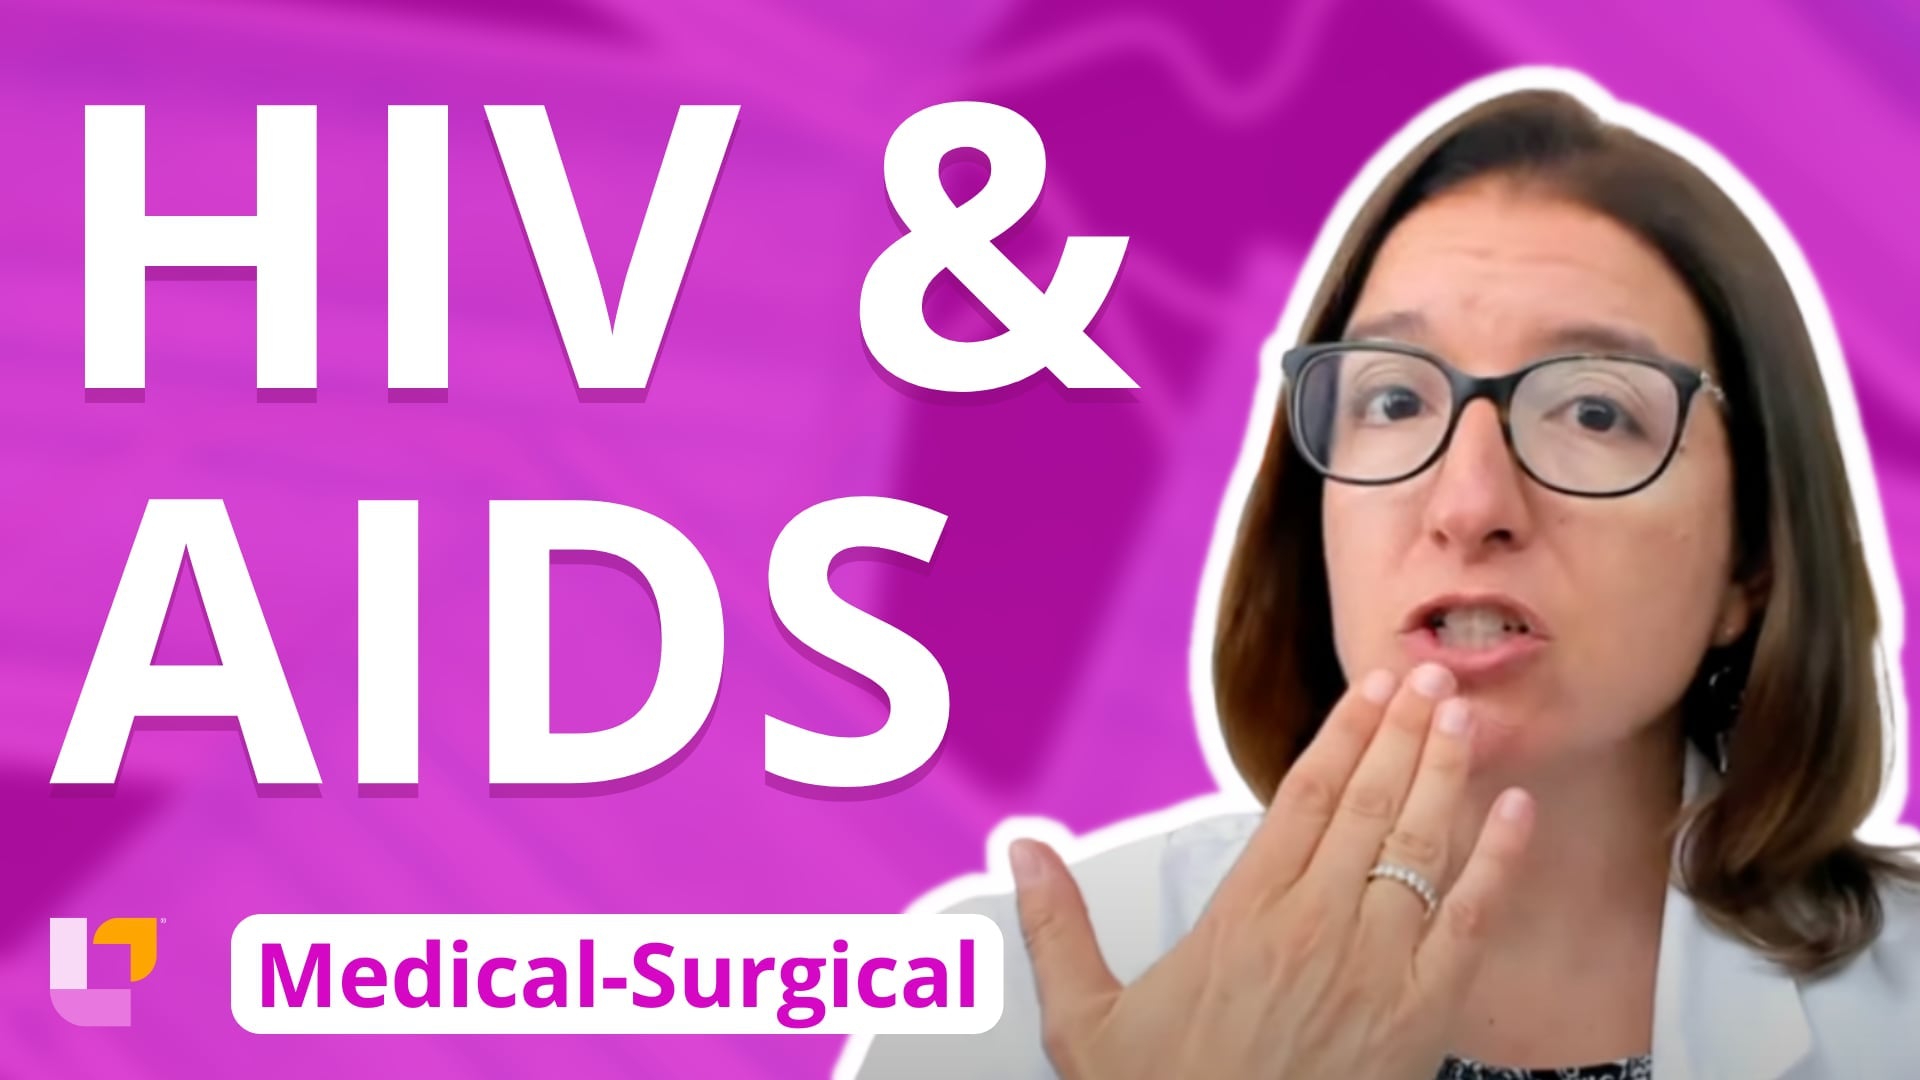 Med-Surg Immune System, part 7: HIV and AIDS - Signs, Symptoms, Diagnosis and Treatment - LevelUpRN